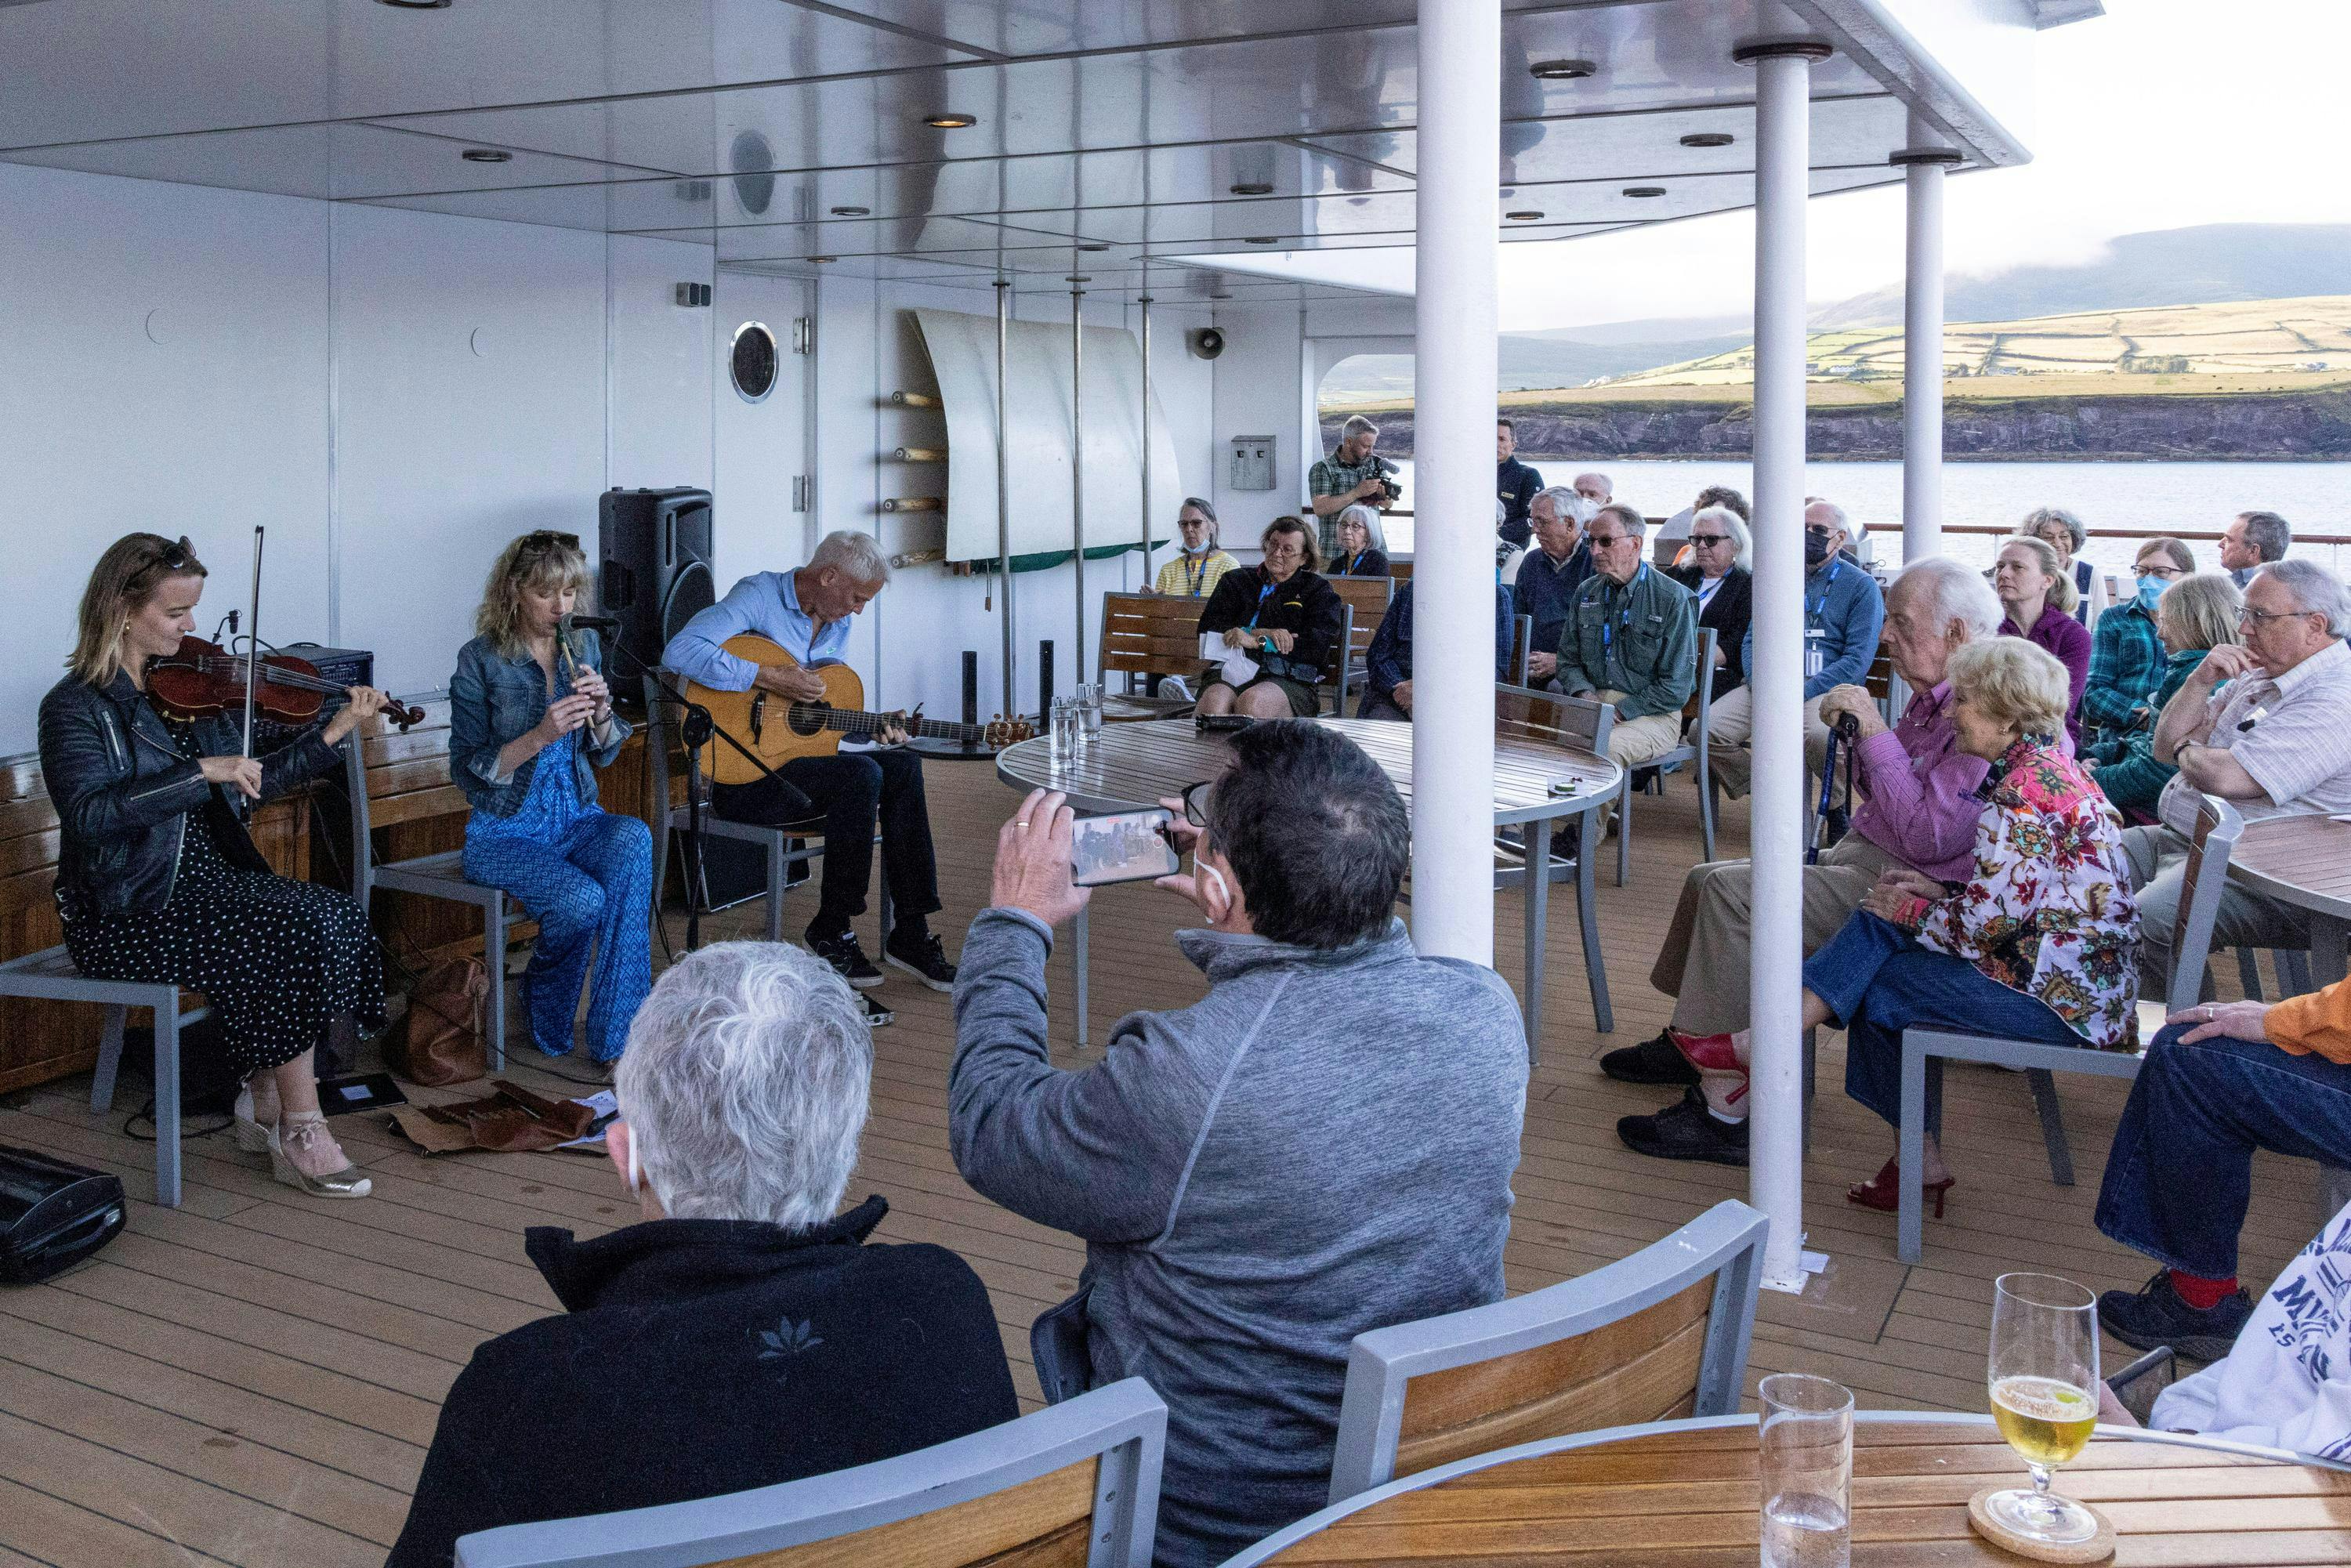 Guests in listenign to local music, Dingle, Country Kerry, Ireland.